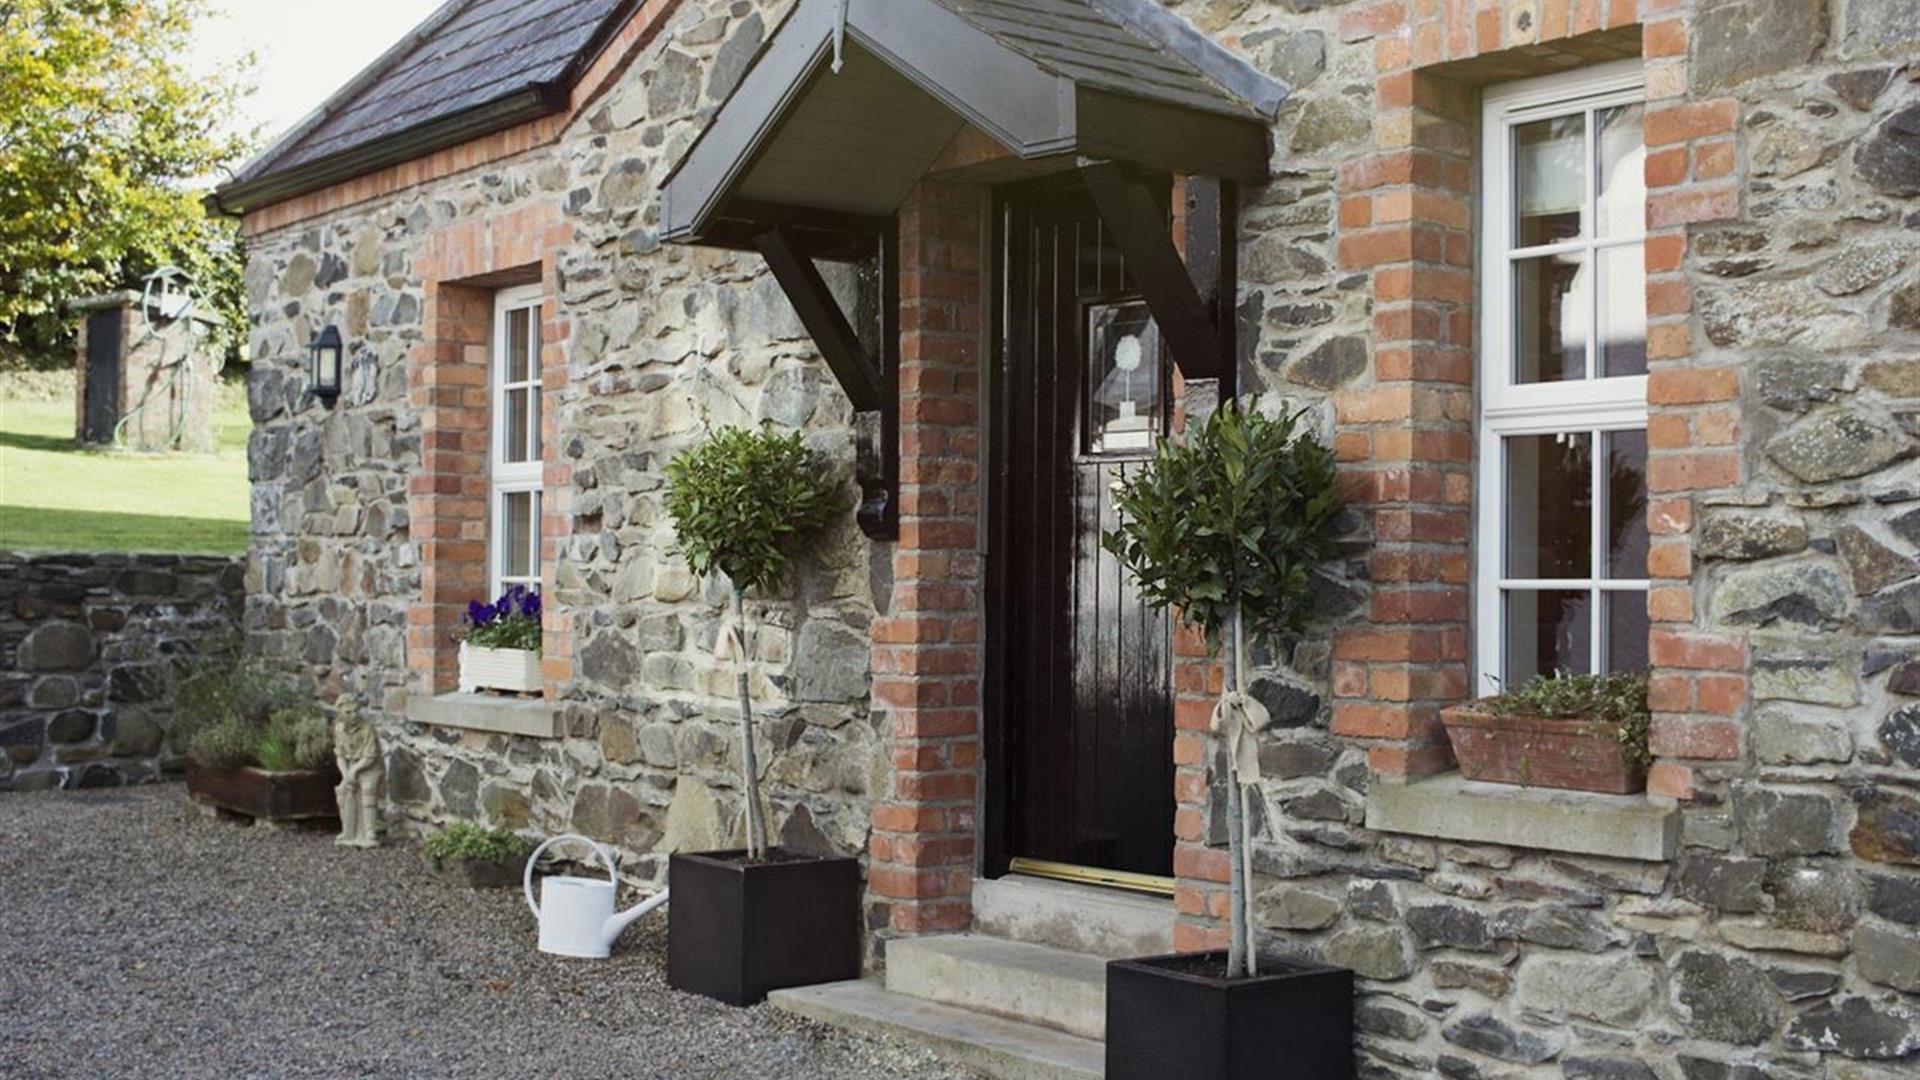 Image shows outside of stone property with bay tree plants at either side of front door